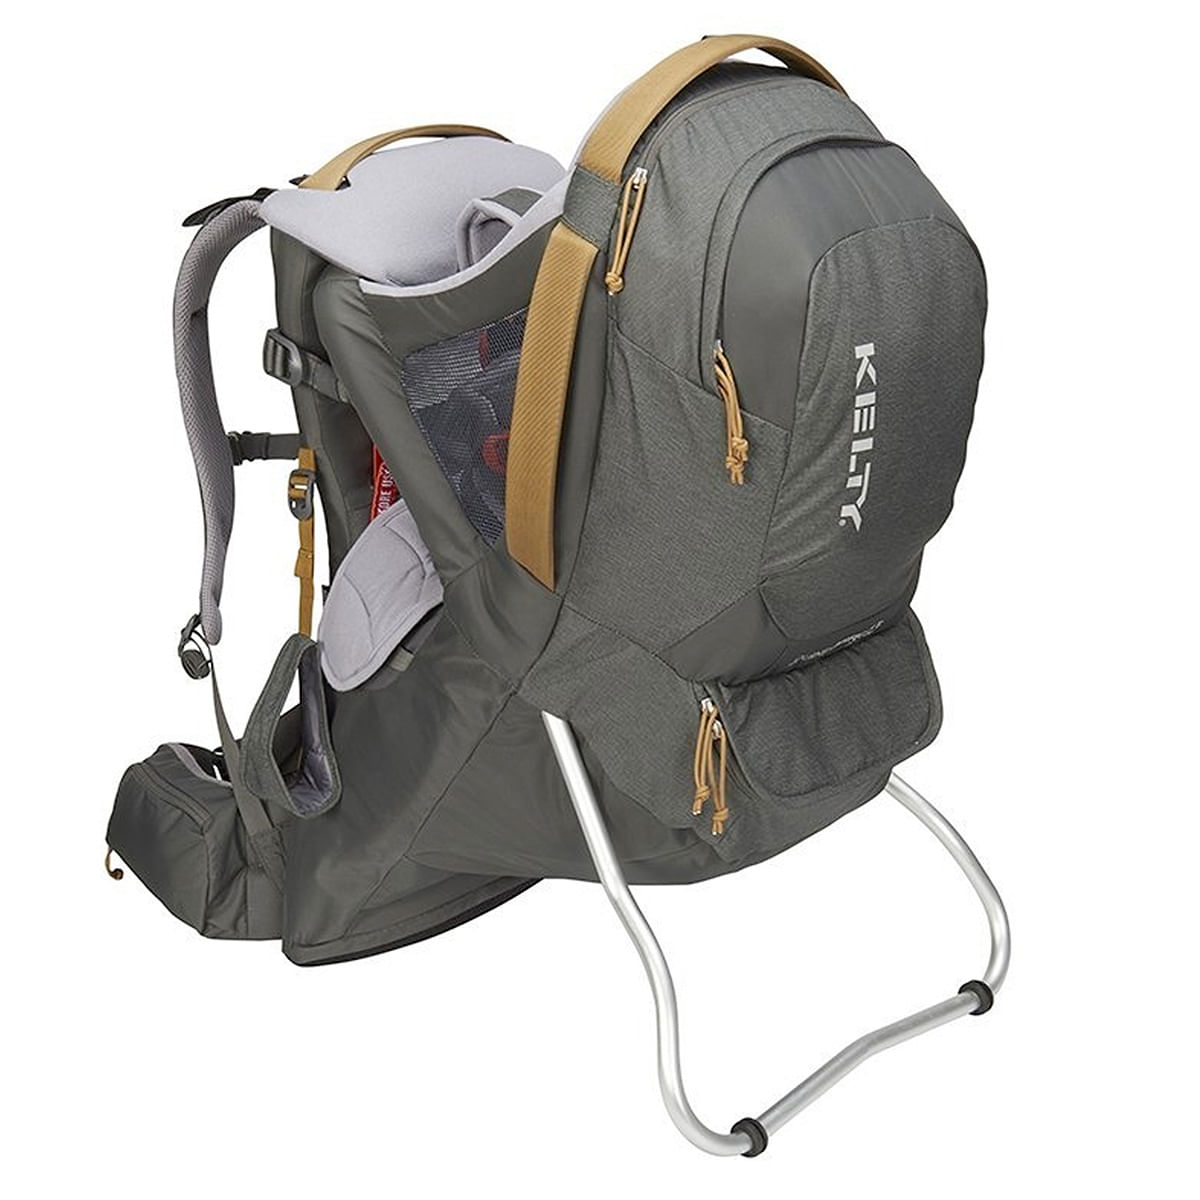 kelty journey perfectfit weight limit